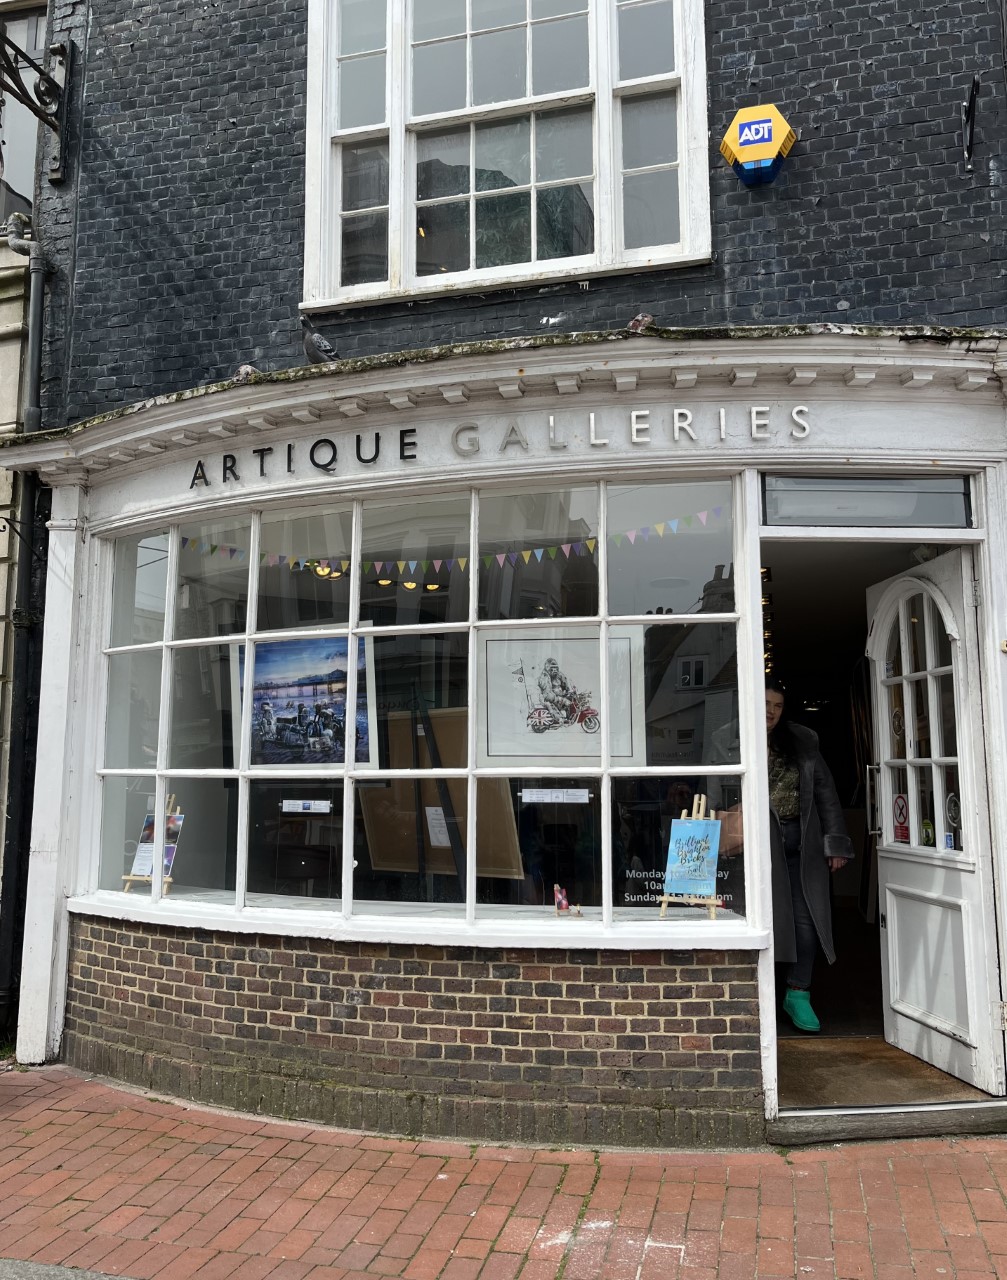 Image shows front of Artique Gallery in Brighton Lanes